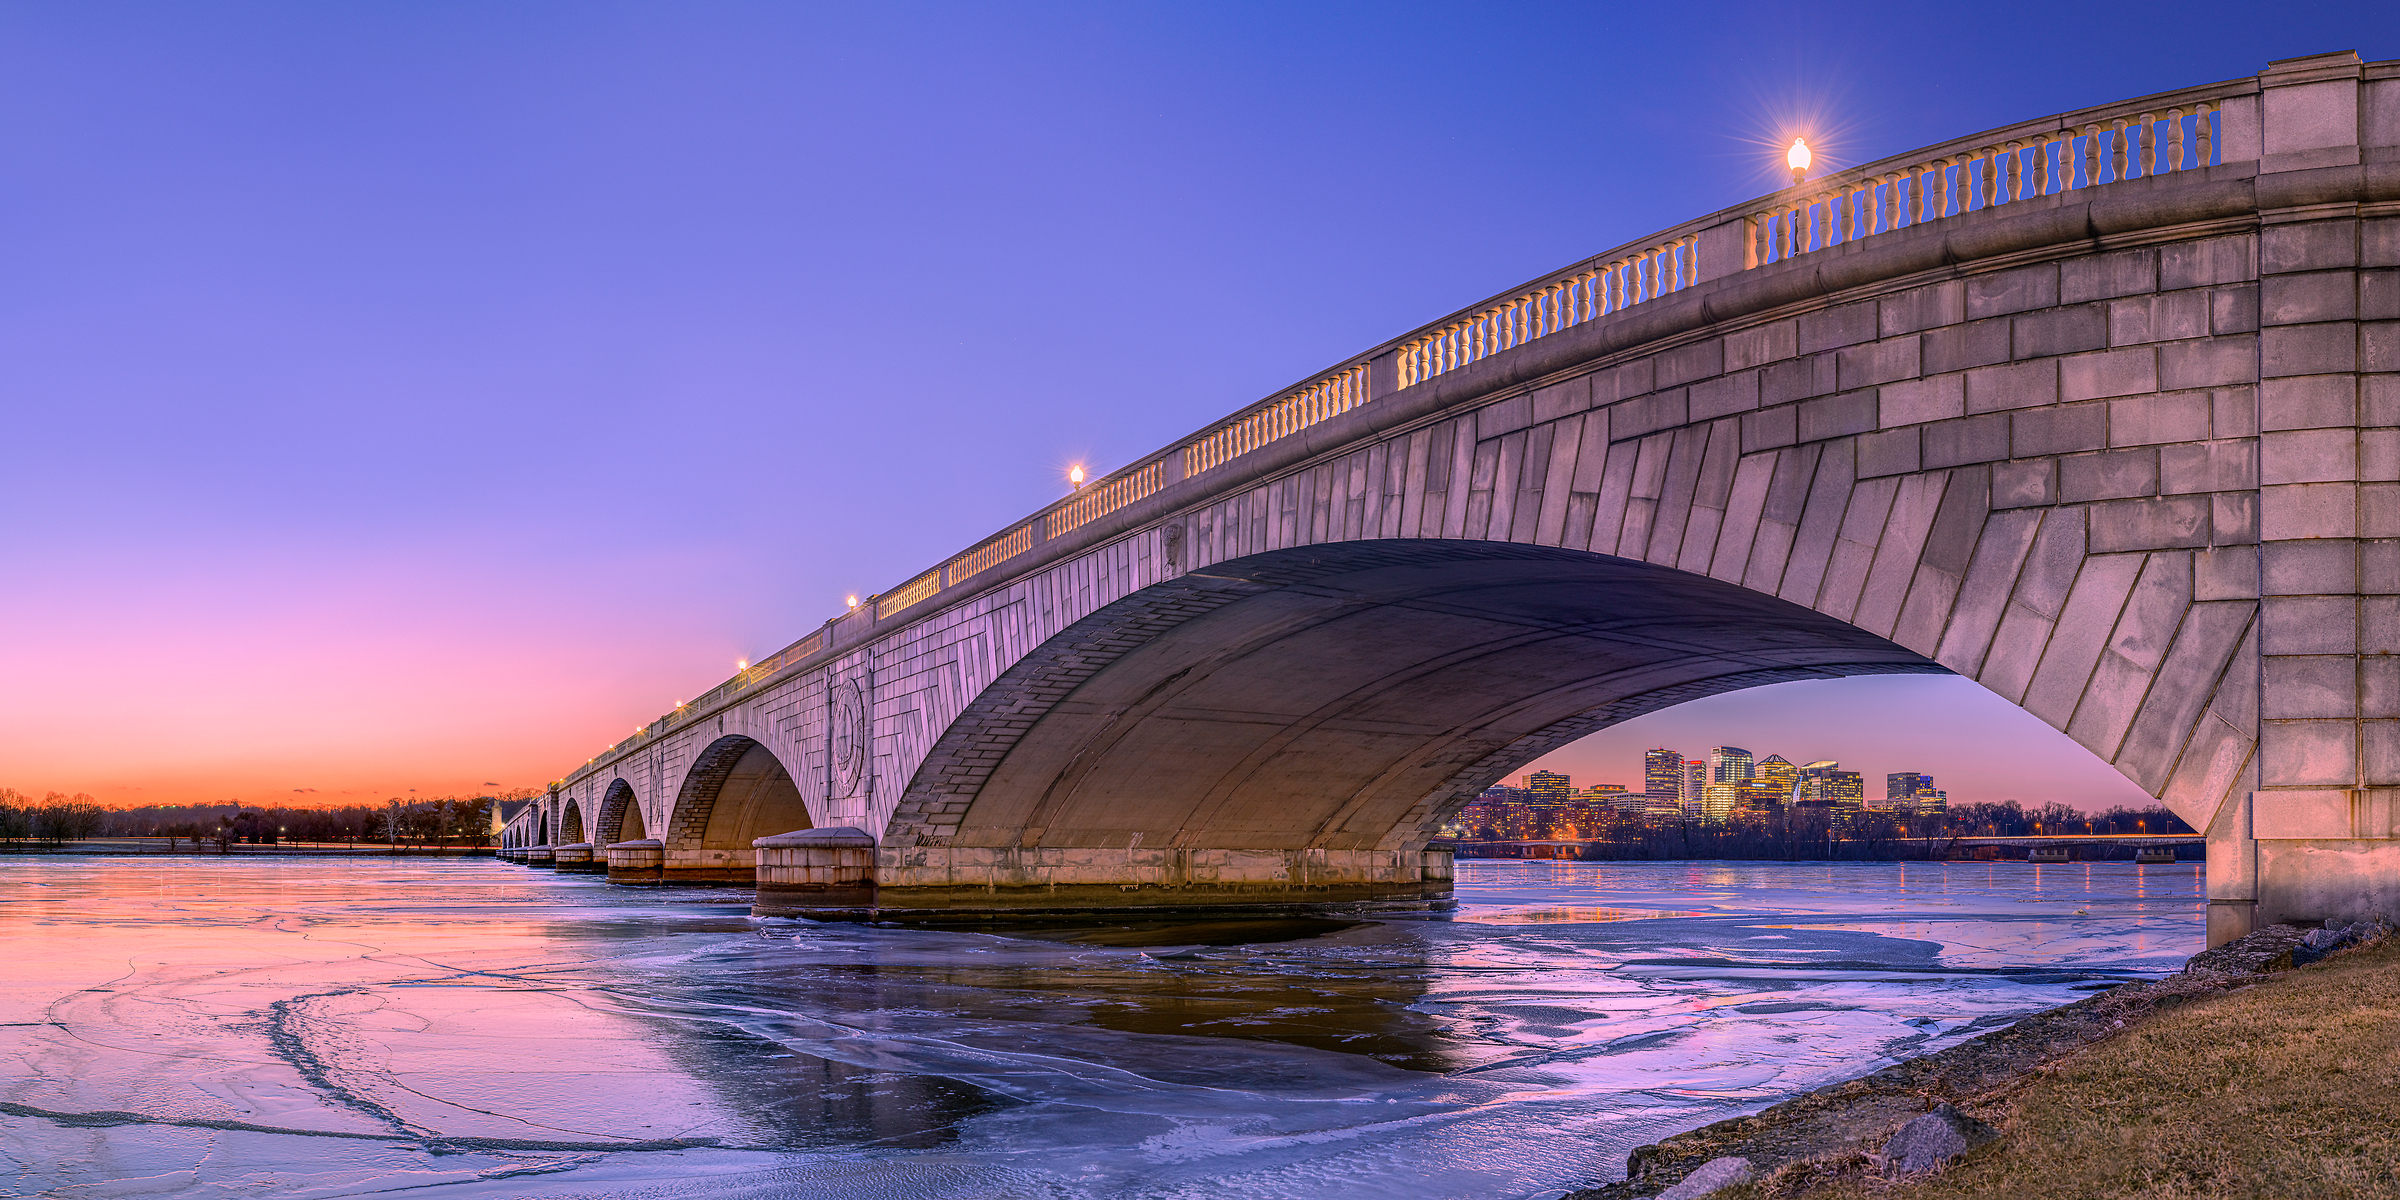 223 megapixels! A very high resolution, large-format VAST photo print of Arlington Memorial Bridge at sunset with the Potomac River frozen; photograph created by Tim Lo Monaco in Arlington Memorial Bridge, Potomac River, Washington, D.C.